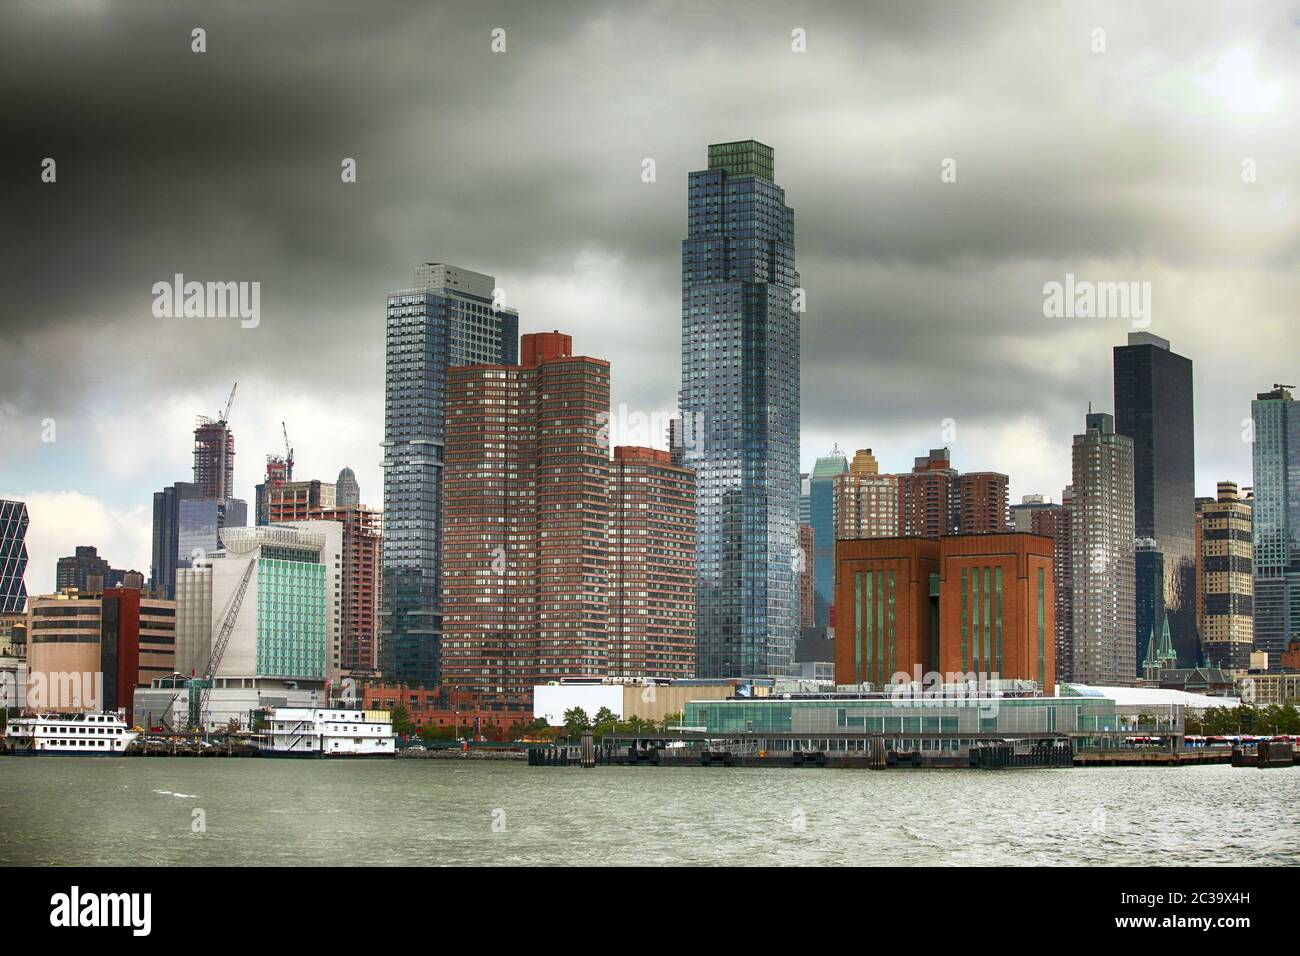 East river water with view of NYC New York City cityscape skyline Stock Photo